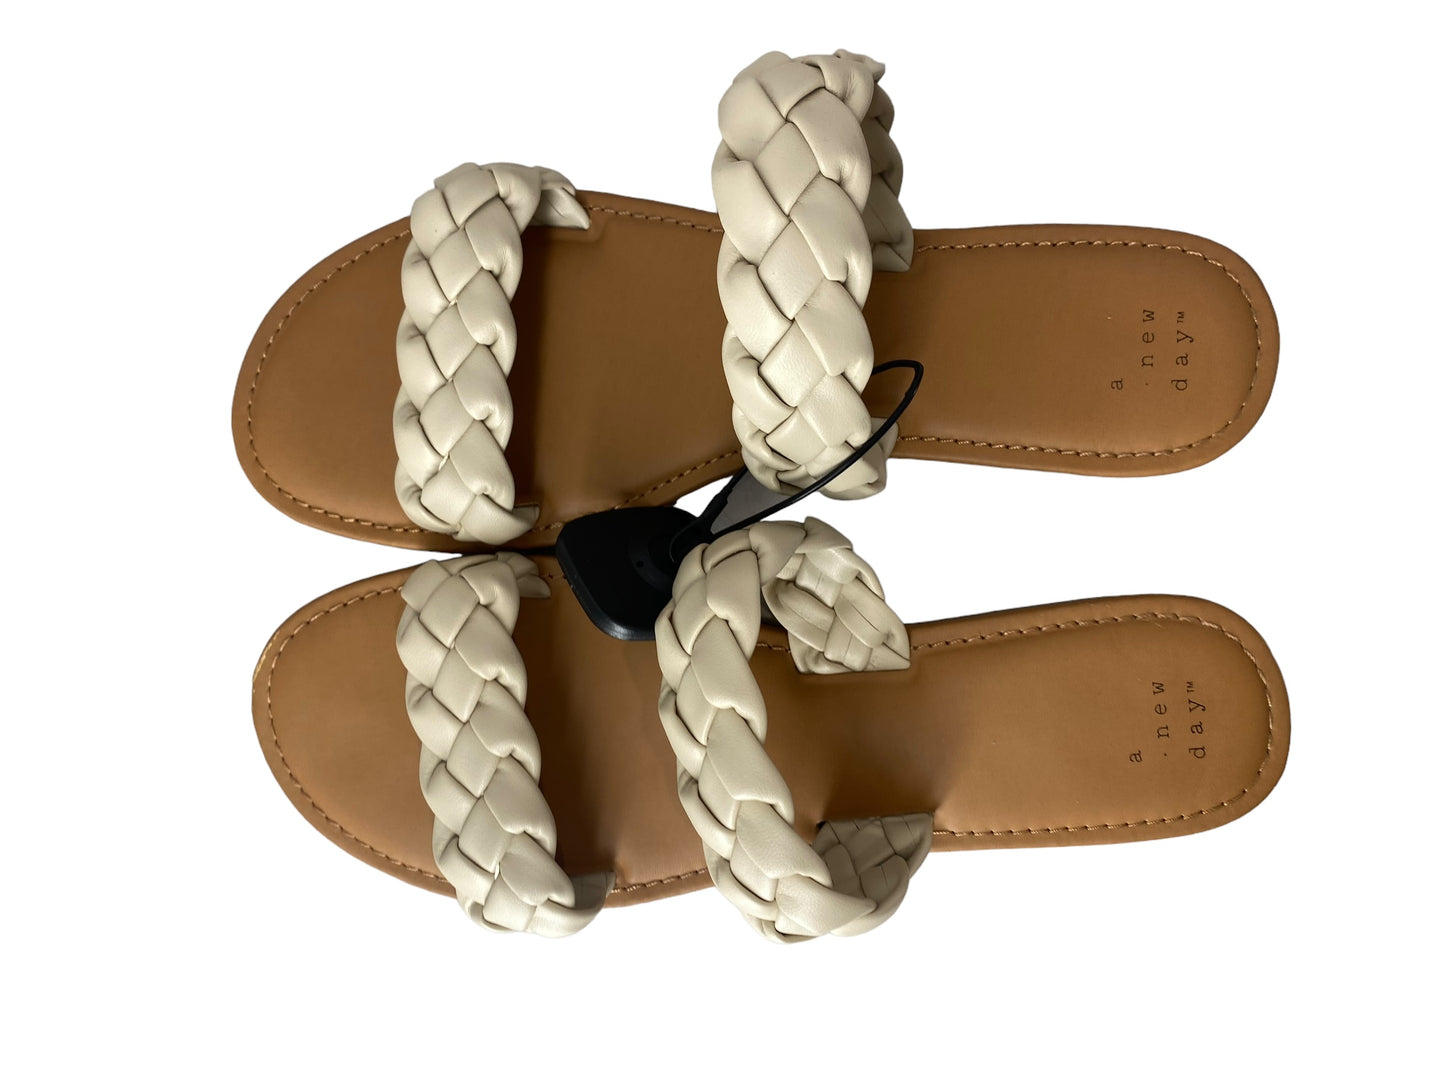 Sandals Flats By A New Day  Size: 10